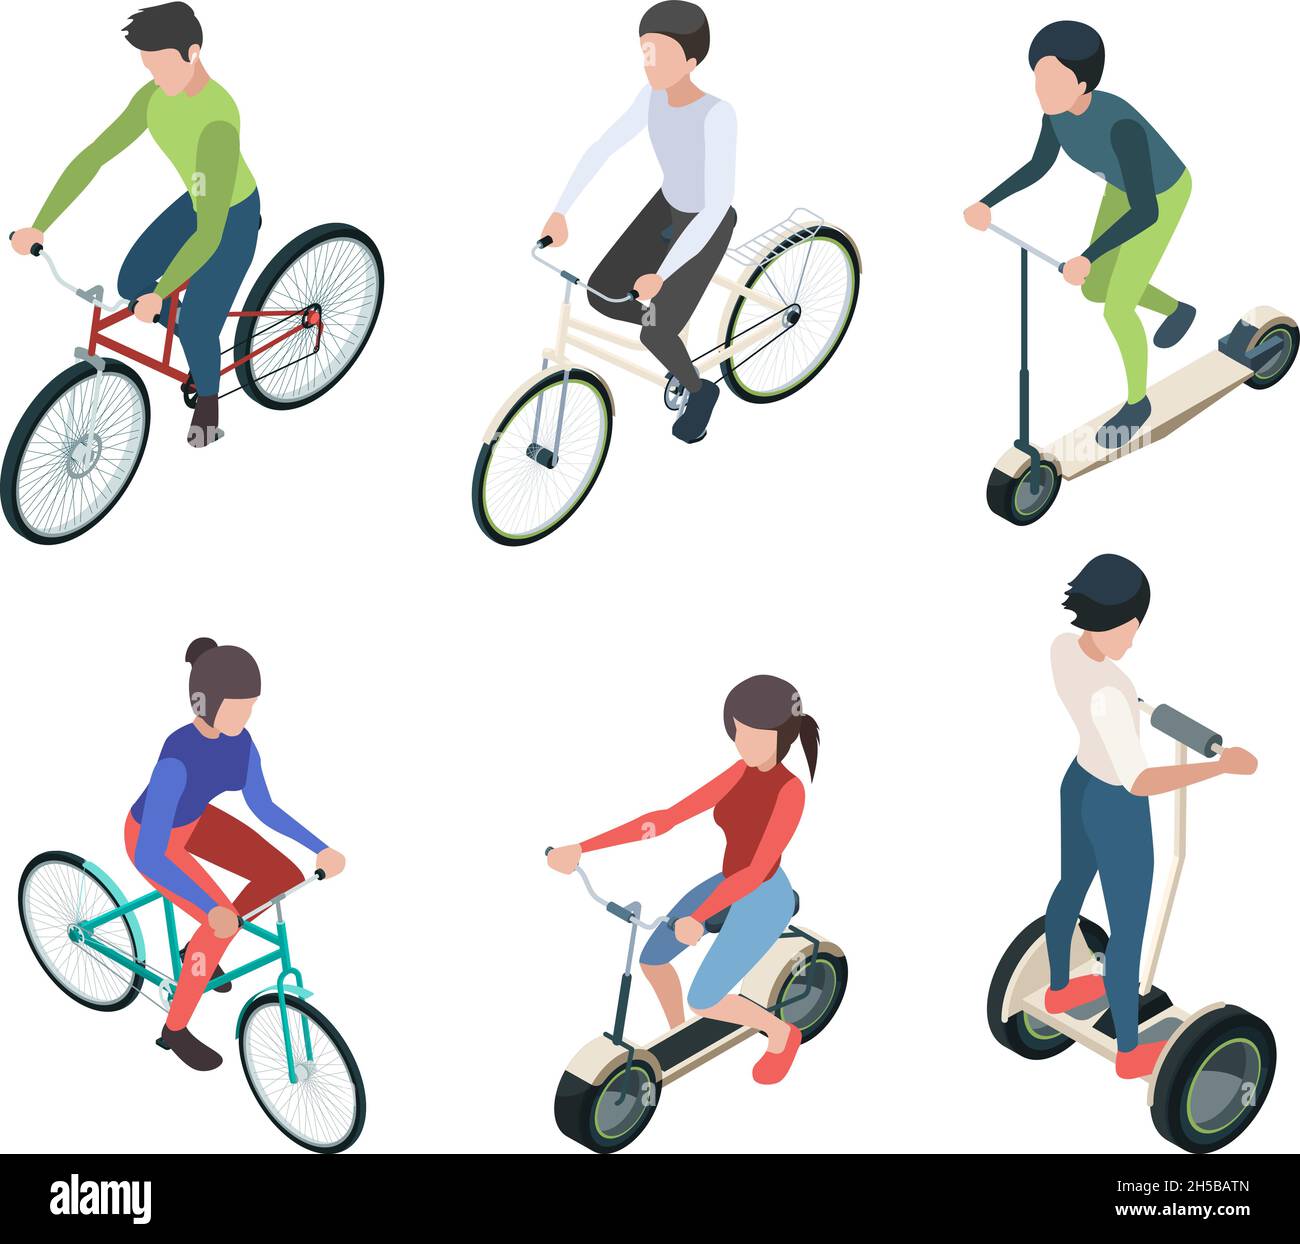 Bike people isometric. Persons riding bicycles fitness outdoor activities garish vector transport illustrations Stock Vector